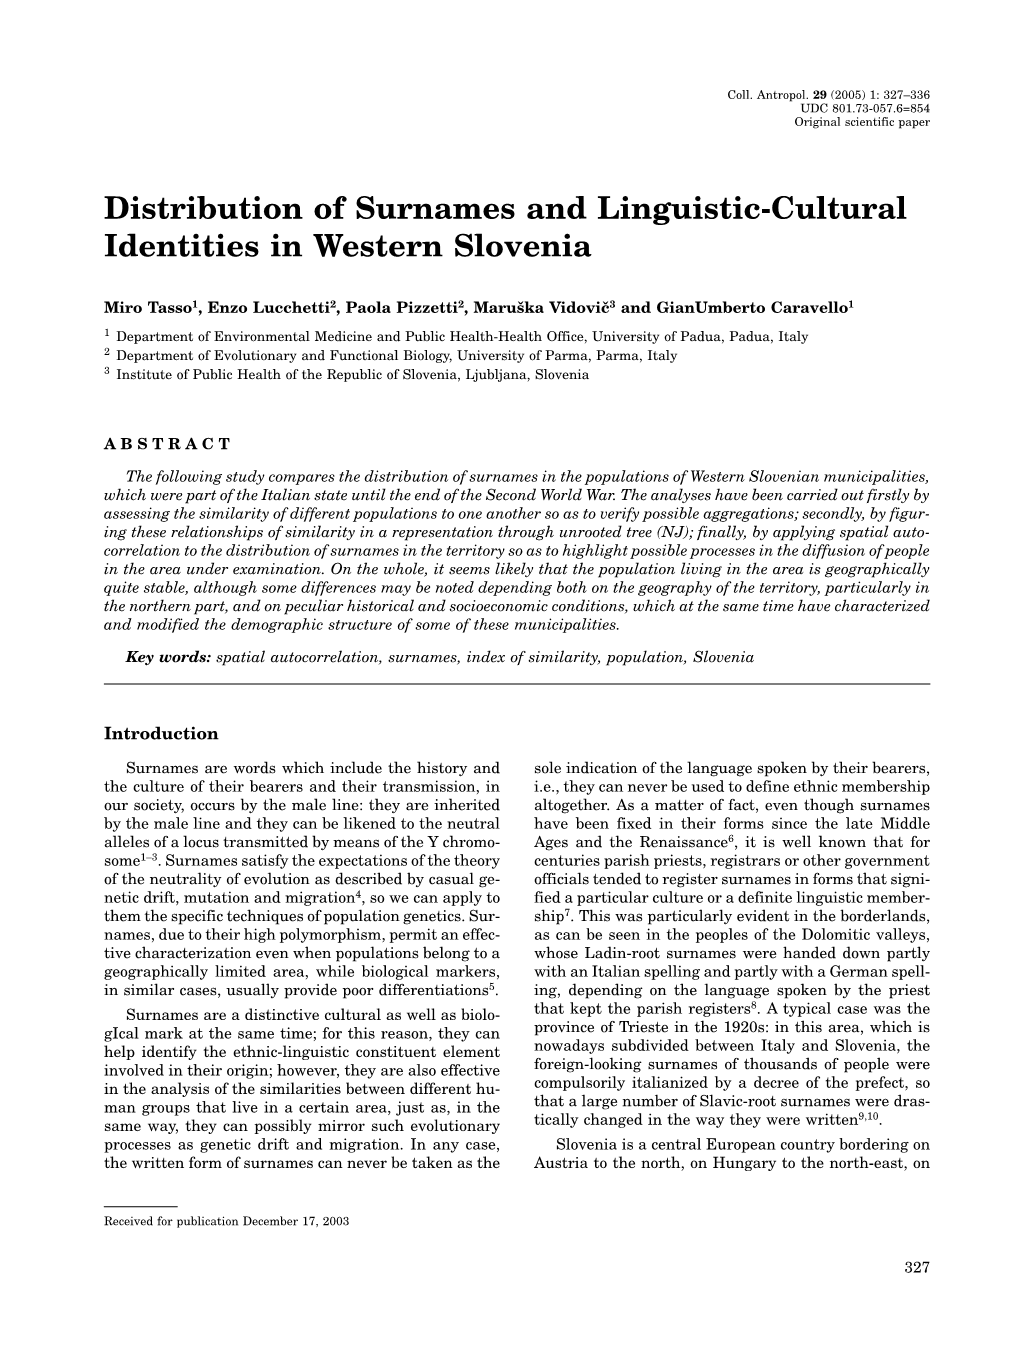 Distribution of Surnames and Linguistic-Cultural Identities in Western Slovenia